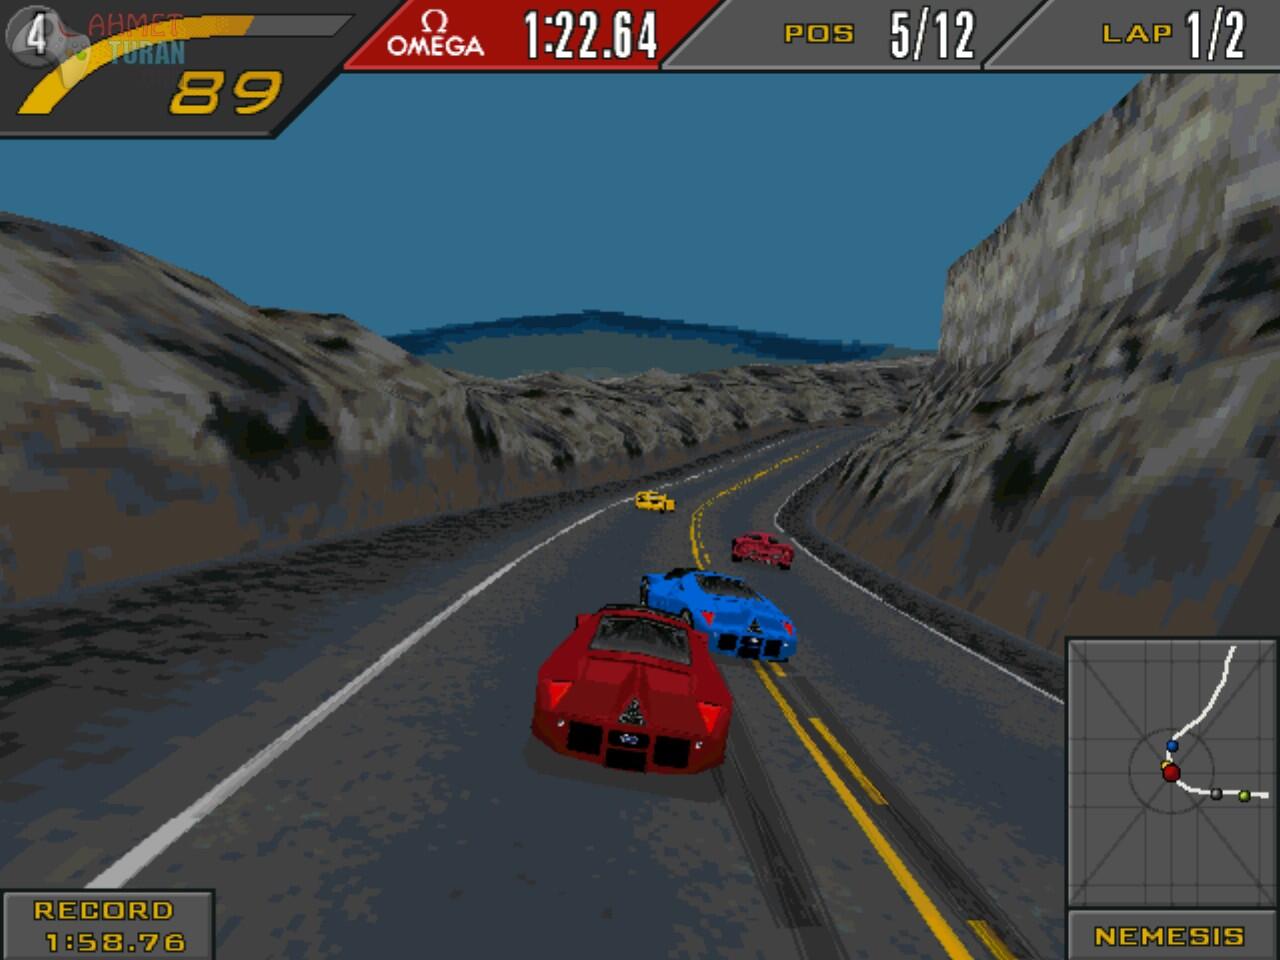 Speed 2 games. Need for Speed II 1997. Need for Speed 2 se. Need for Speed 2 se 1997. Need for Speed 2 ps1.